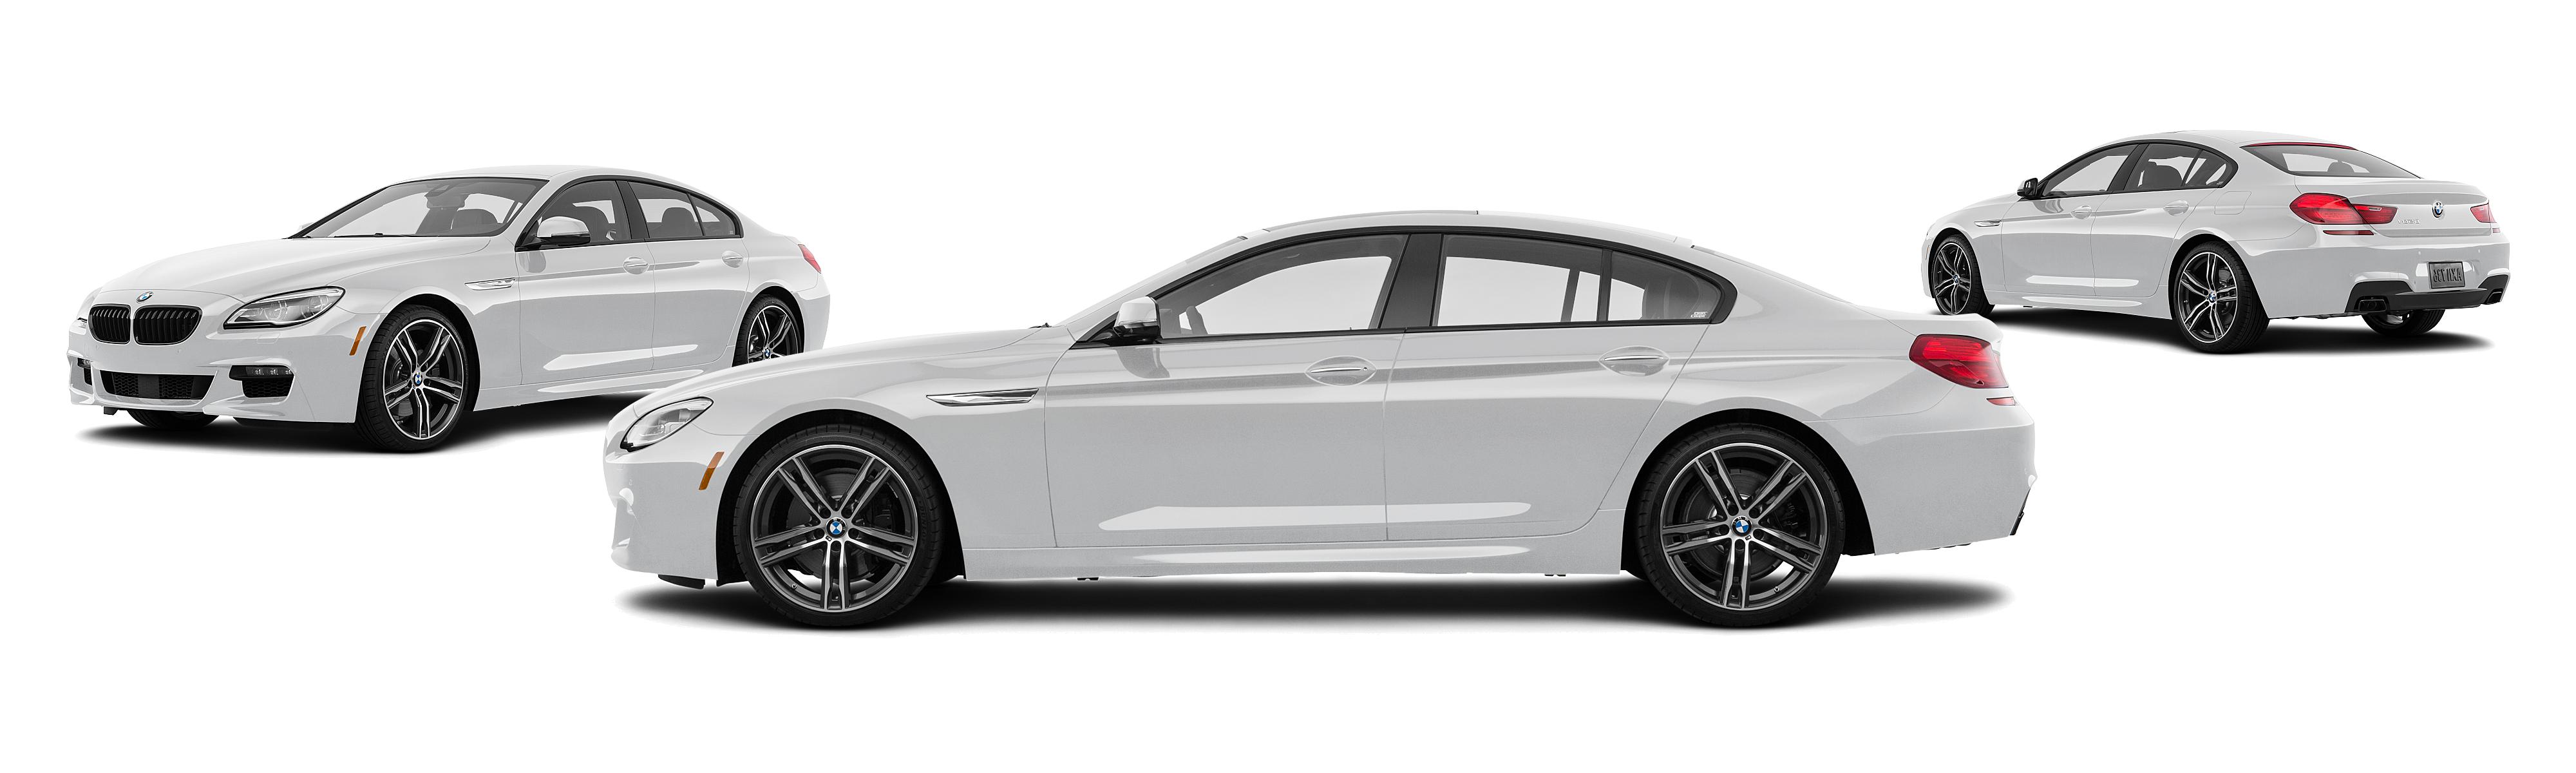 2018 BMW 6 Series 650i Gran Coupe 4dr Sedan - Research - GrooveCar